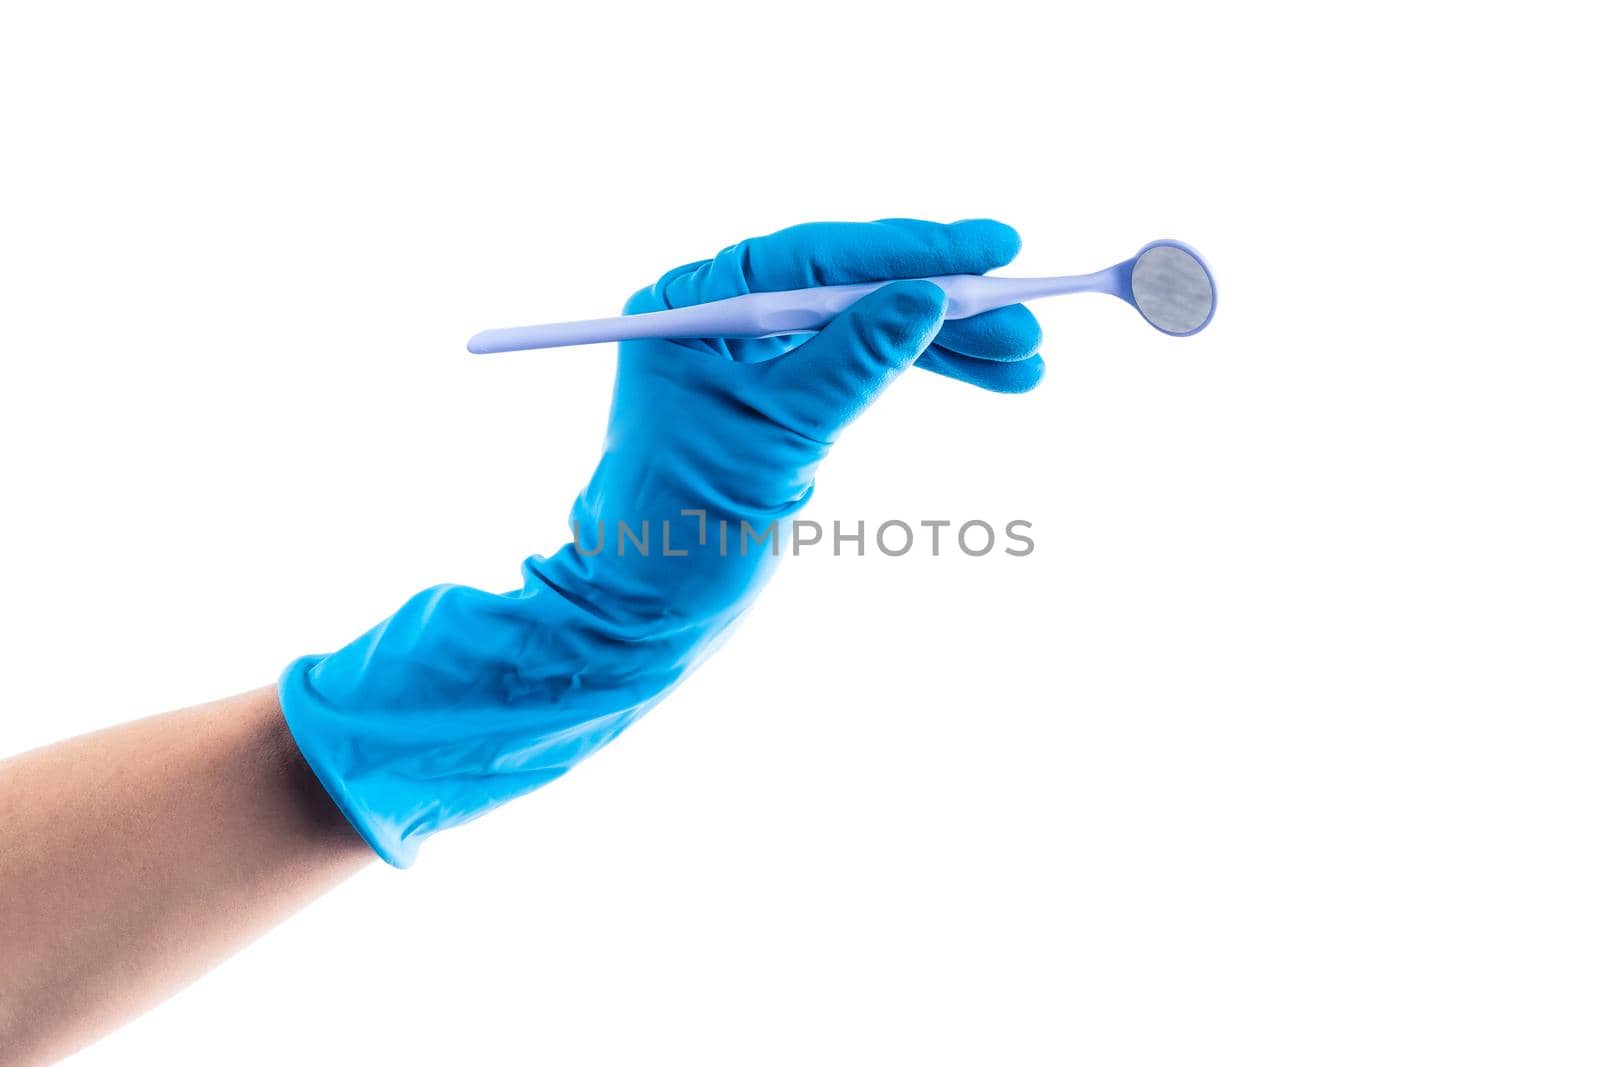 Hand in blue glove holding dental angled mirror isolated on white background